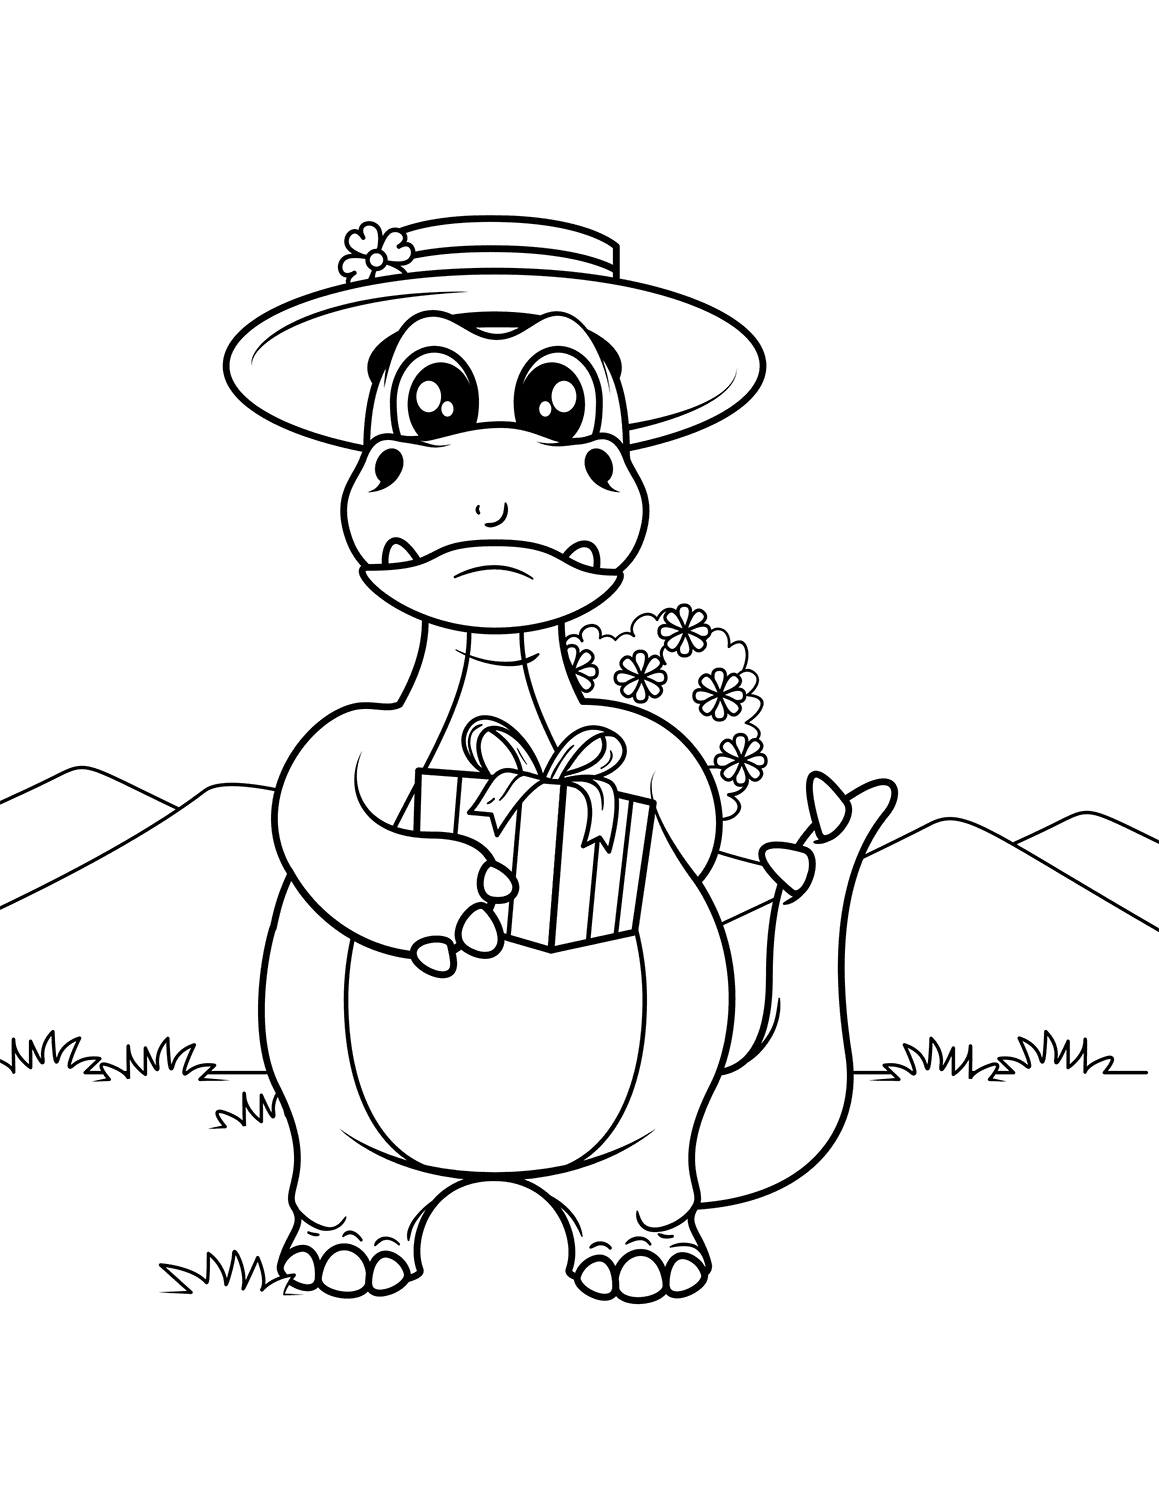 Dinosaur with gift box Coloring Page